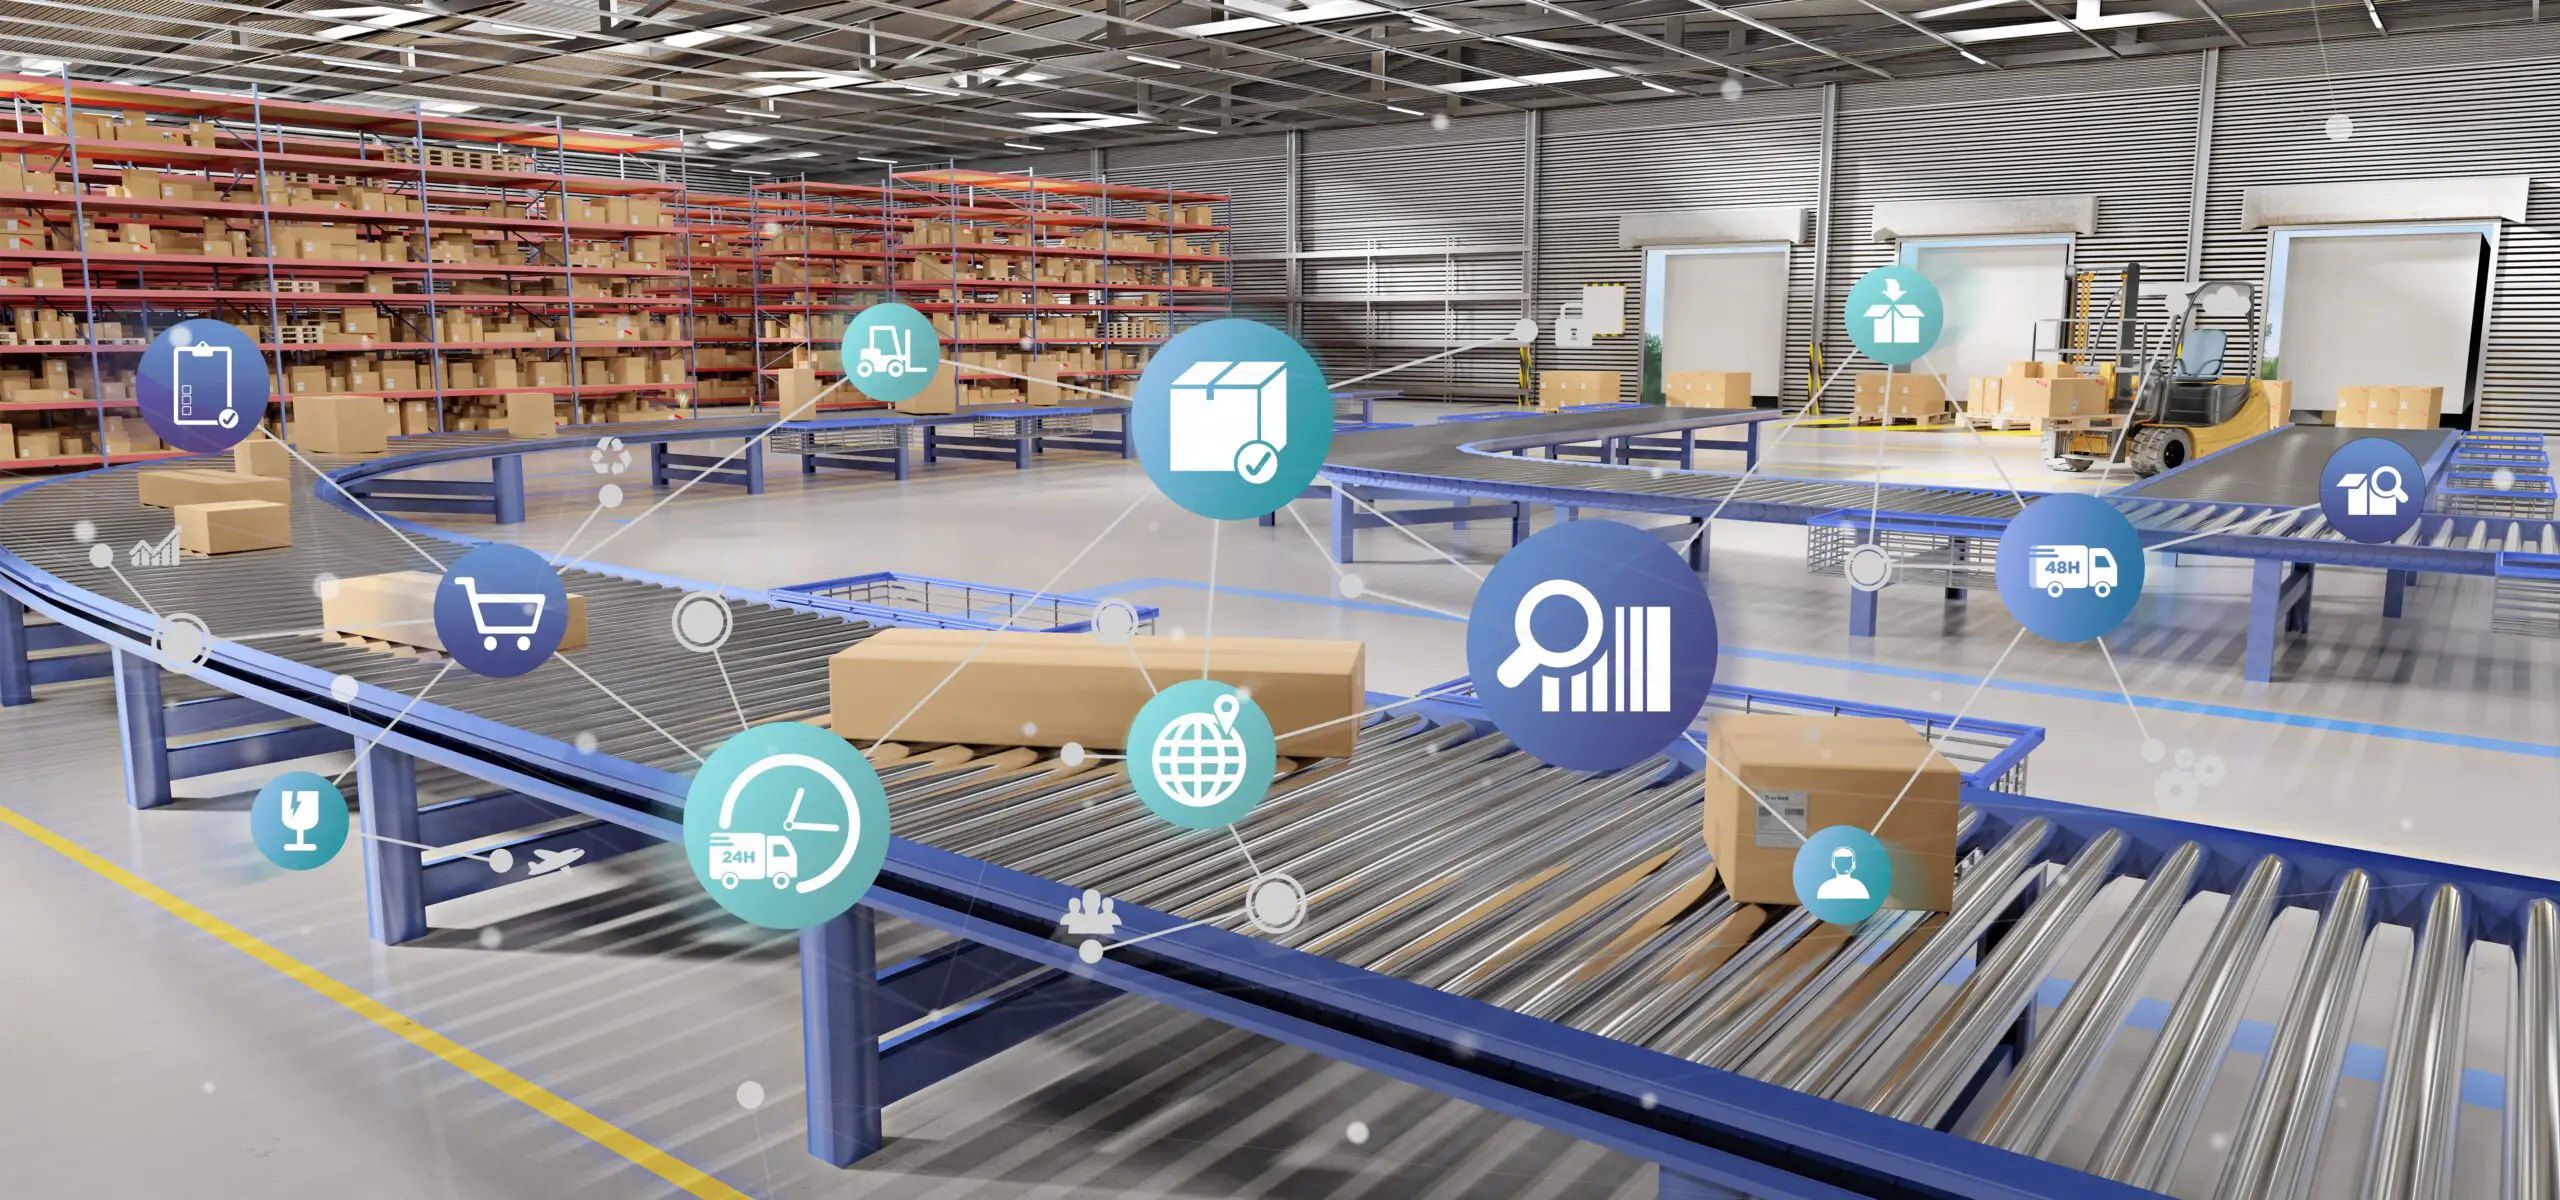 Boxes on a conveyor belt in a warehouse are overlaid with icons representing transportation and logistics.